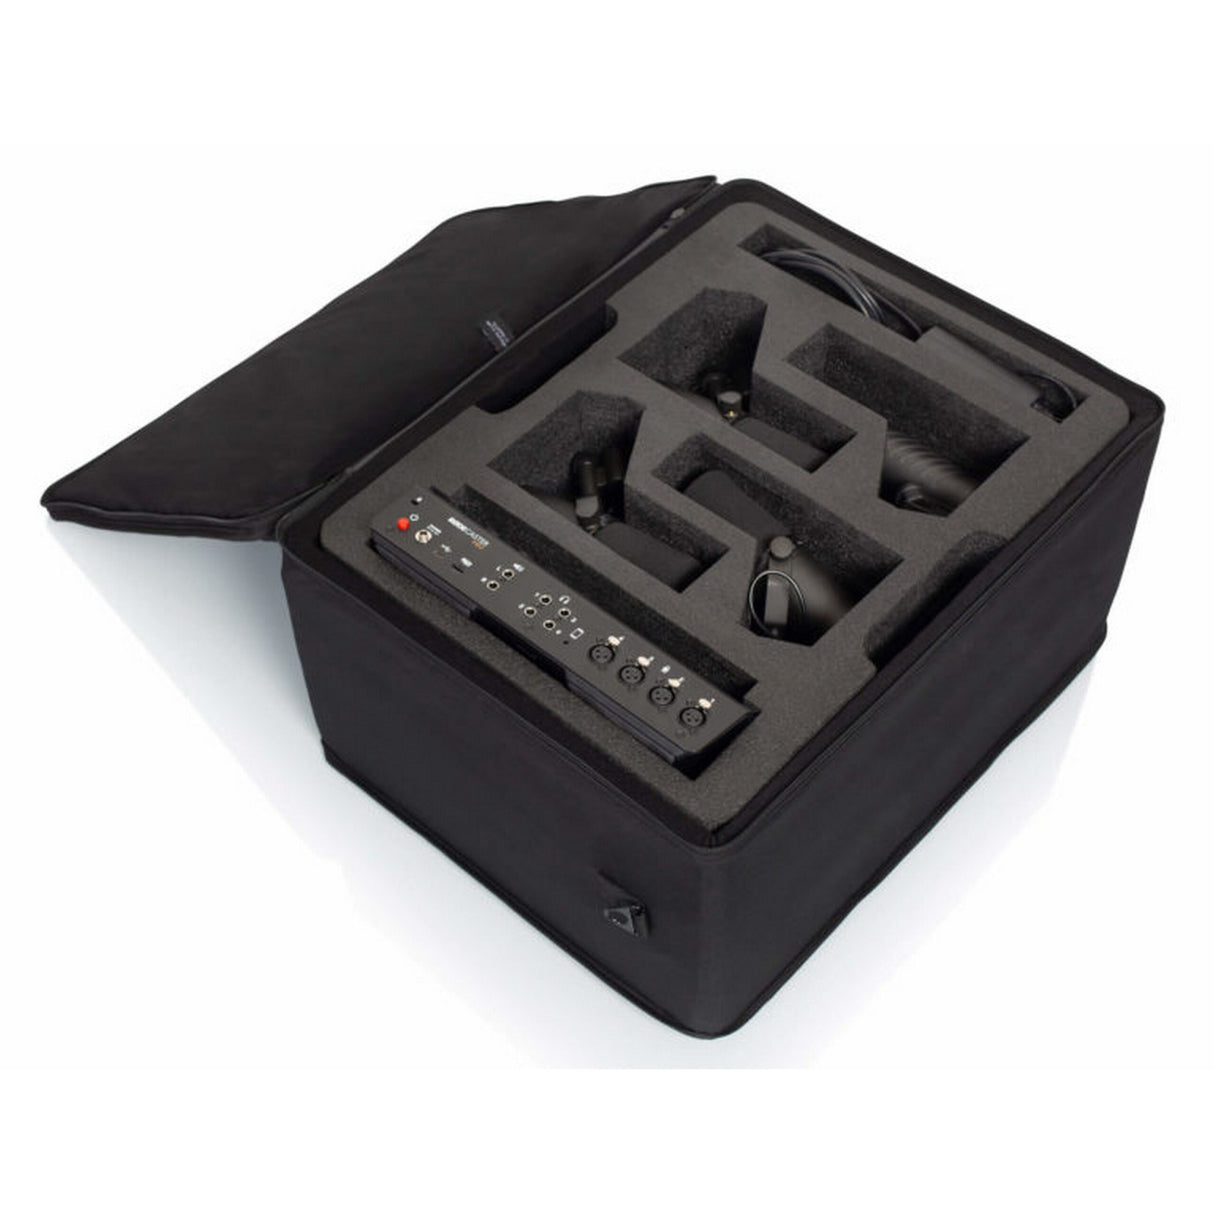 Gator GL-RODECASTER4 Custom Foam-Cut Lightweight Case for RODECaster Pro Podcast Mixer, 4 Headphones and 4 Microphones